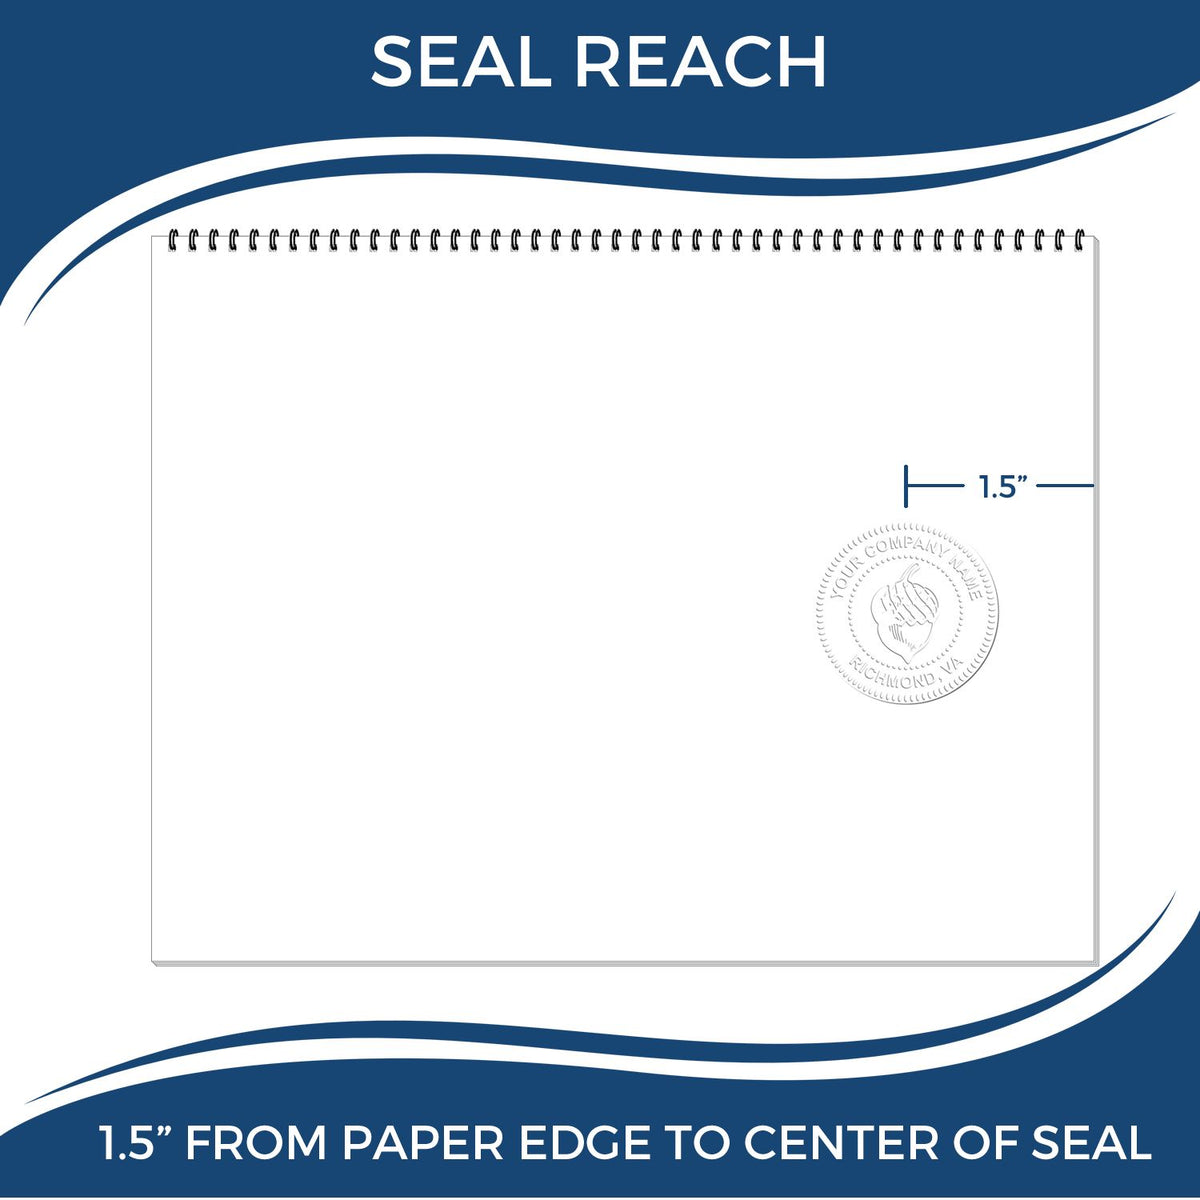 An infographic showing the seal reach which is represented by a ruler and a miniature seal image of the Gift Michigan Engineer Seal